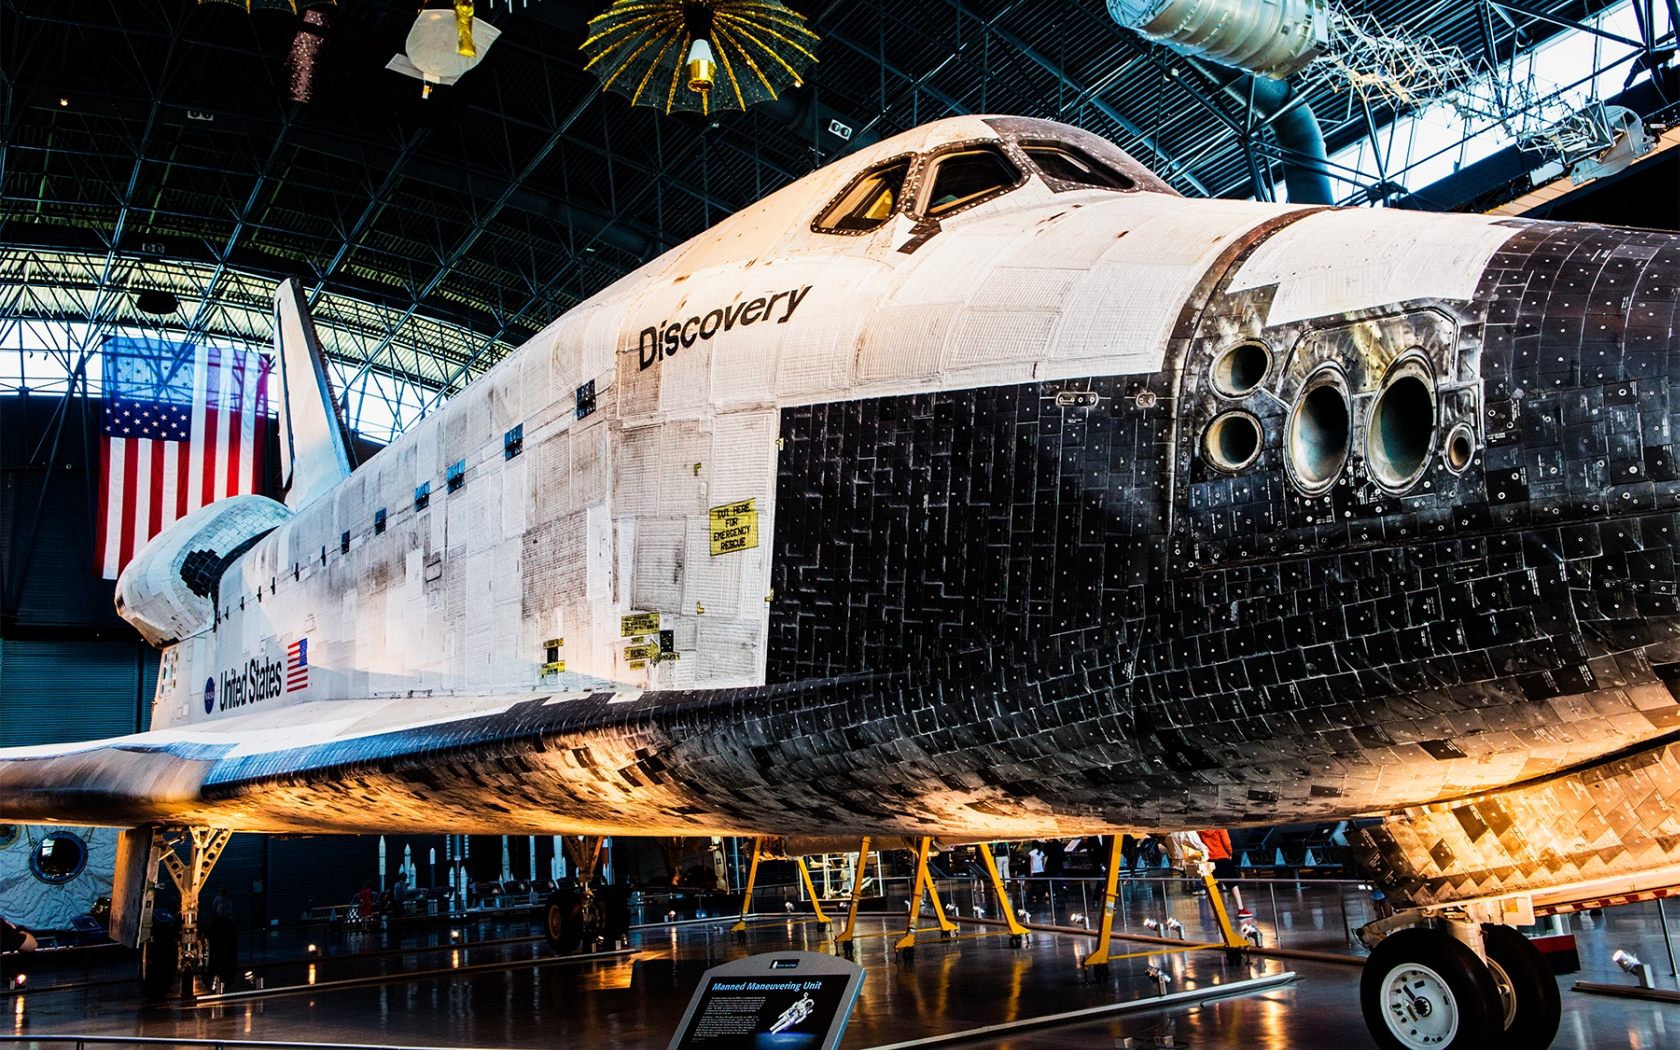 Vehicles Space Shuttle Discovery 1680x1050